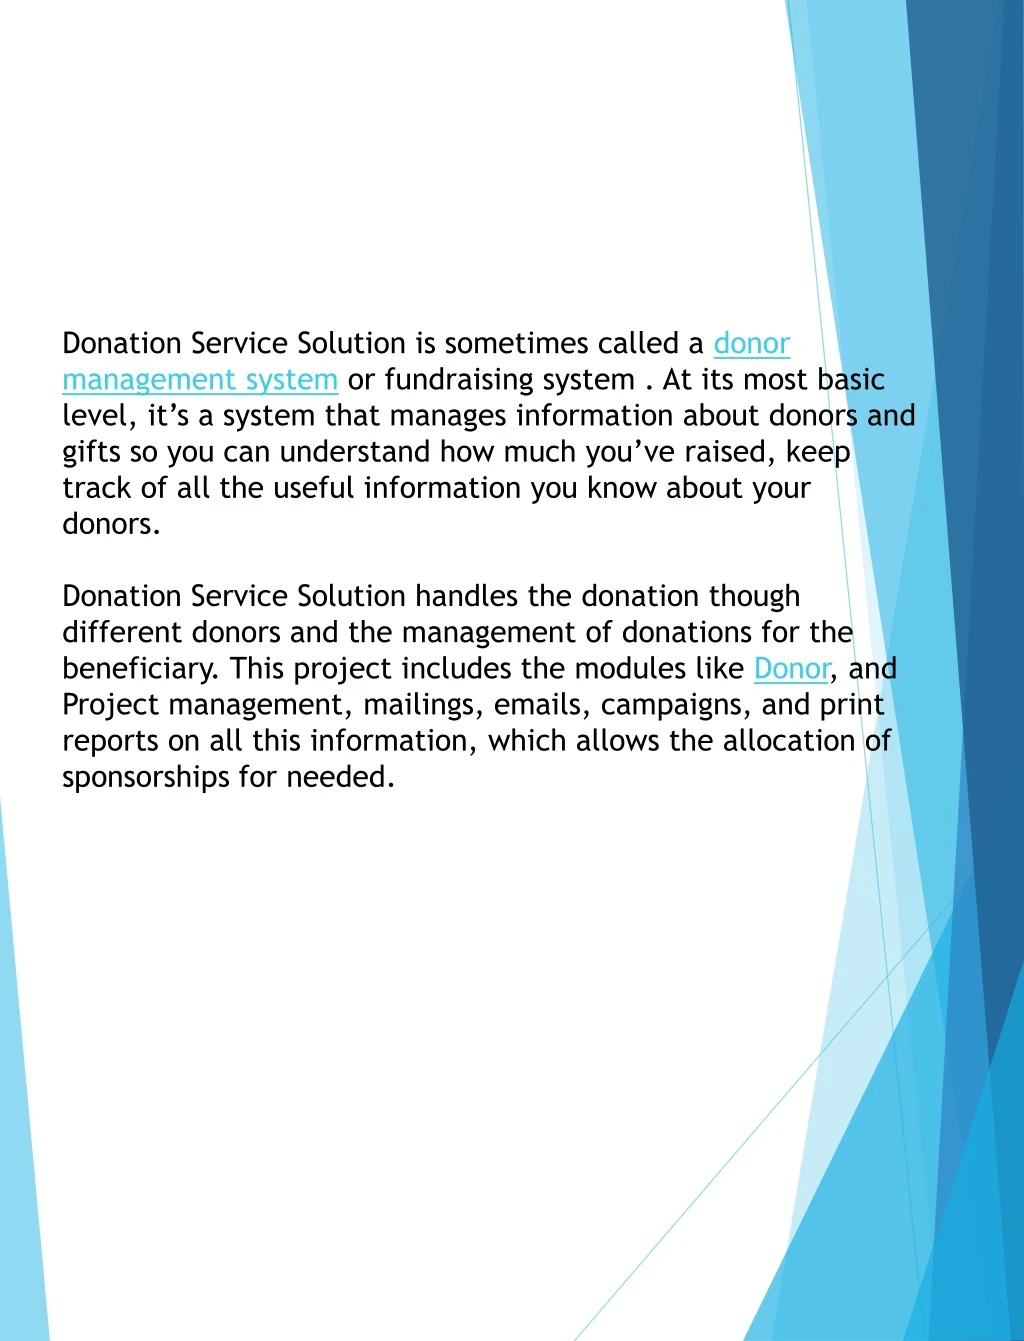 donation service solution is sometimes called